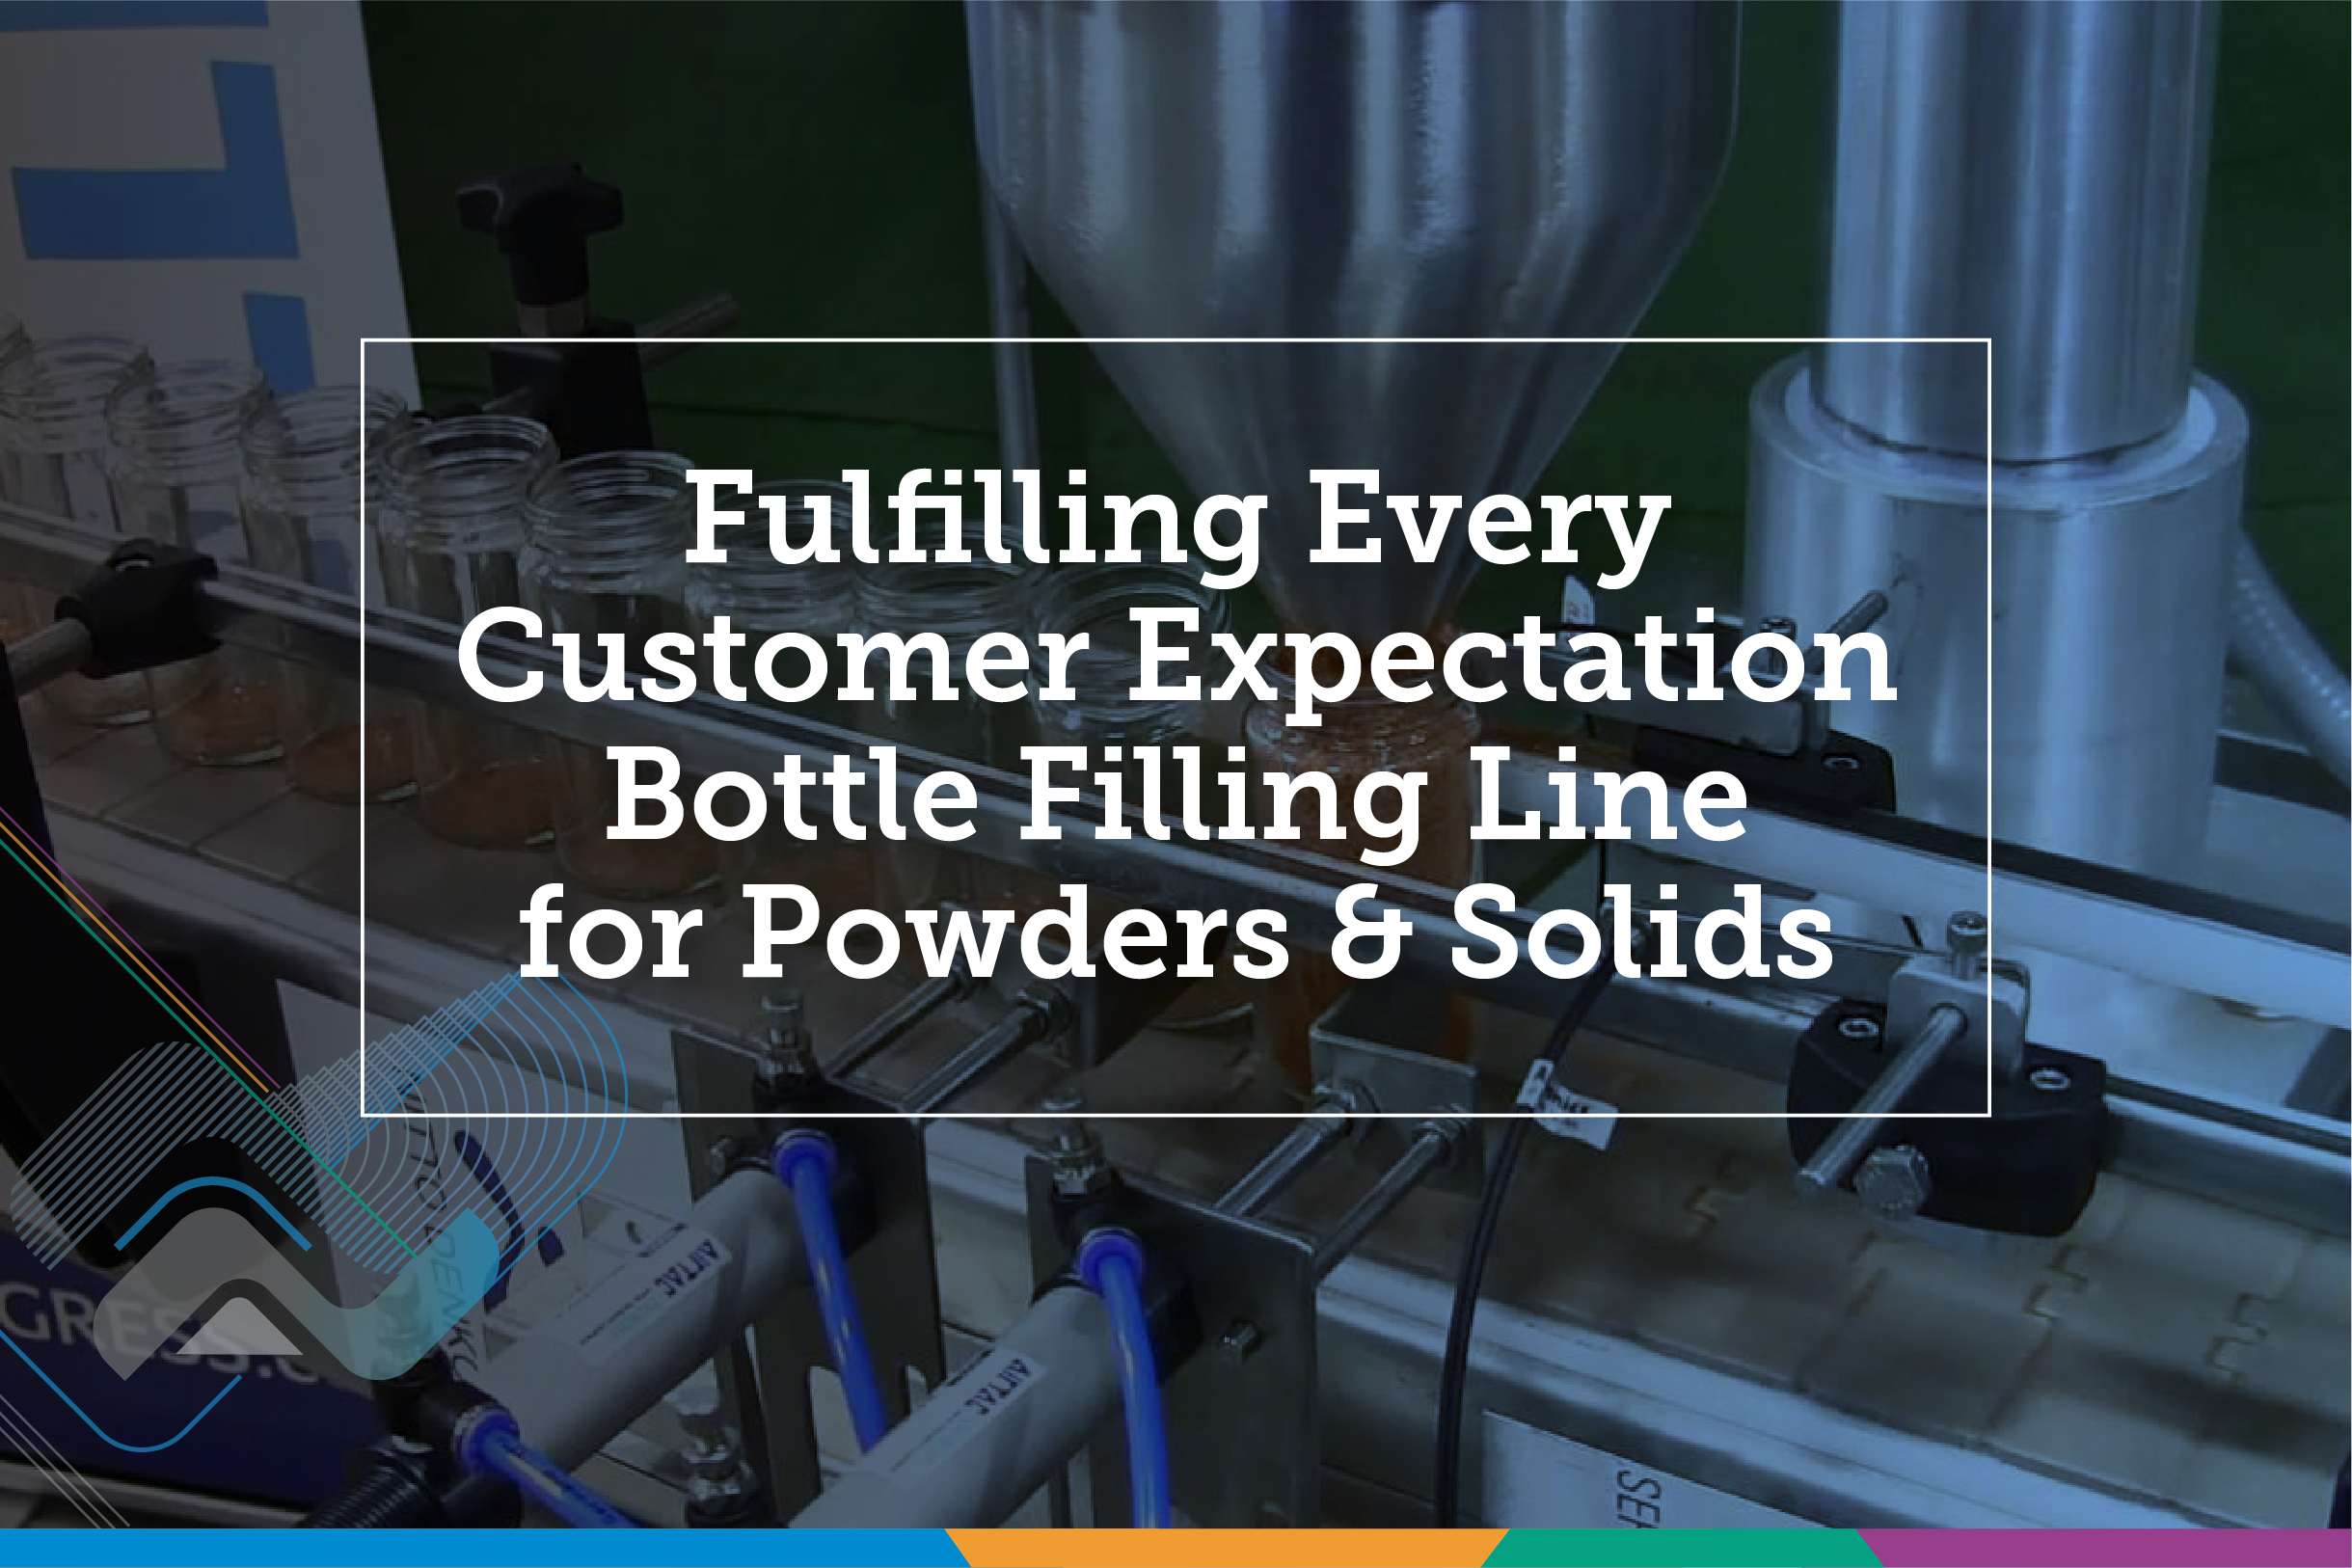 Fulfilling Every Customer Expectation Bottle Filling Line for Powders & Solids